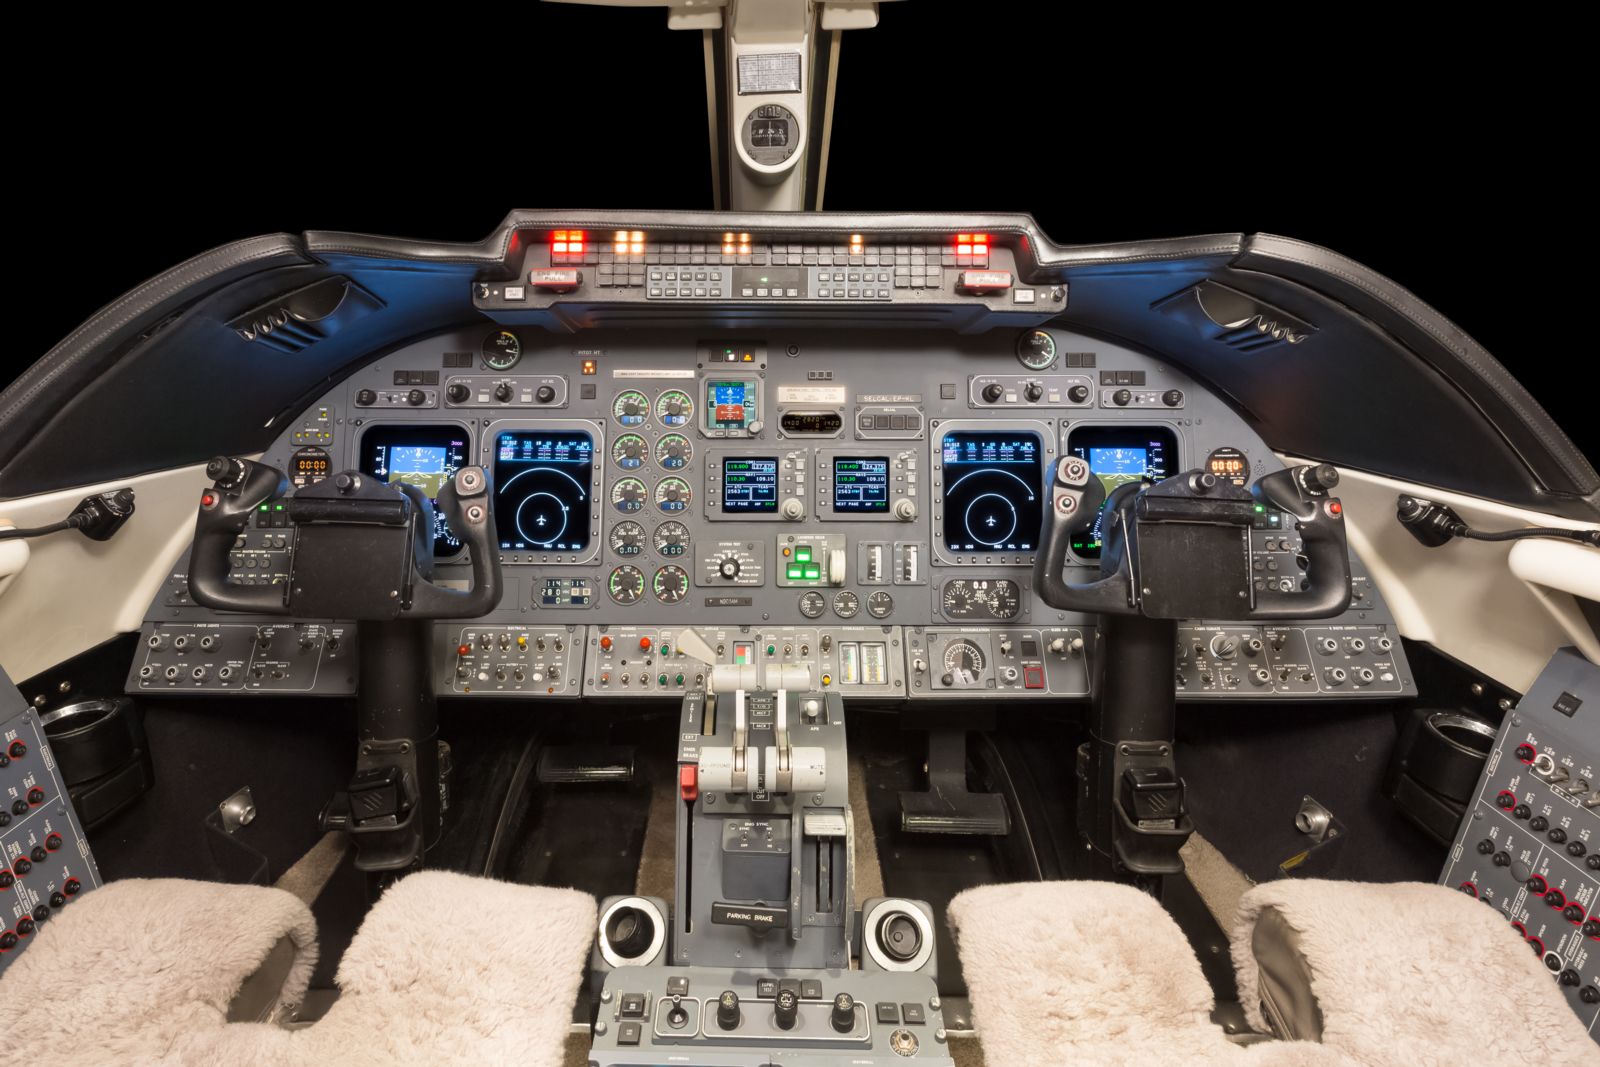 Bombardier Learjet 60  S/N 269 for sale | gallery image: /userfiles/images/Lear60_sn269/cockpit.jpg